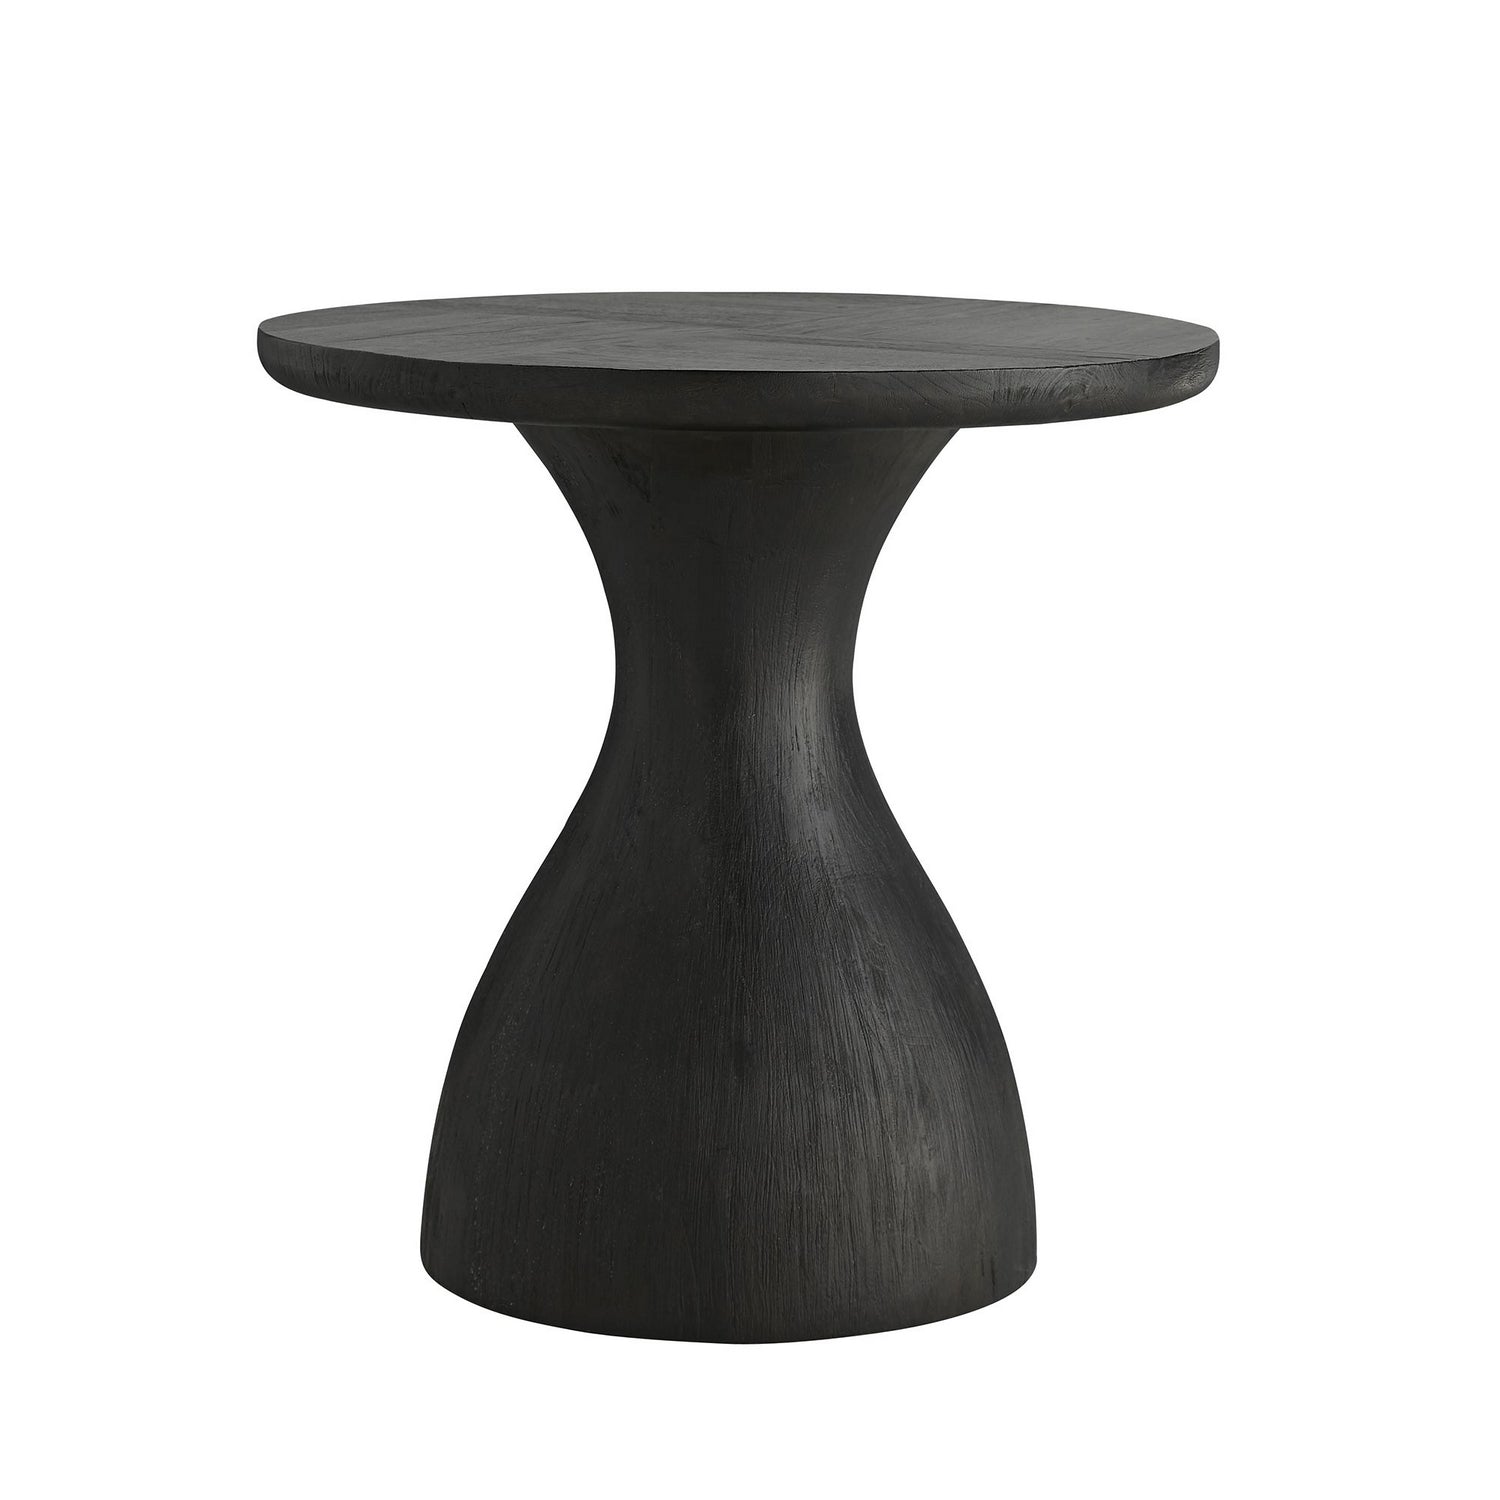 Side Table from the Scout collection in Sandblasted Soft Black Waxed finish